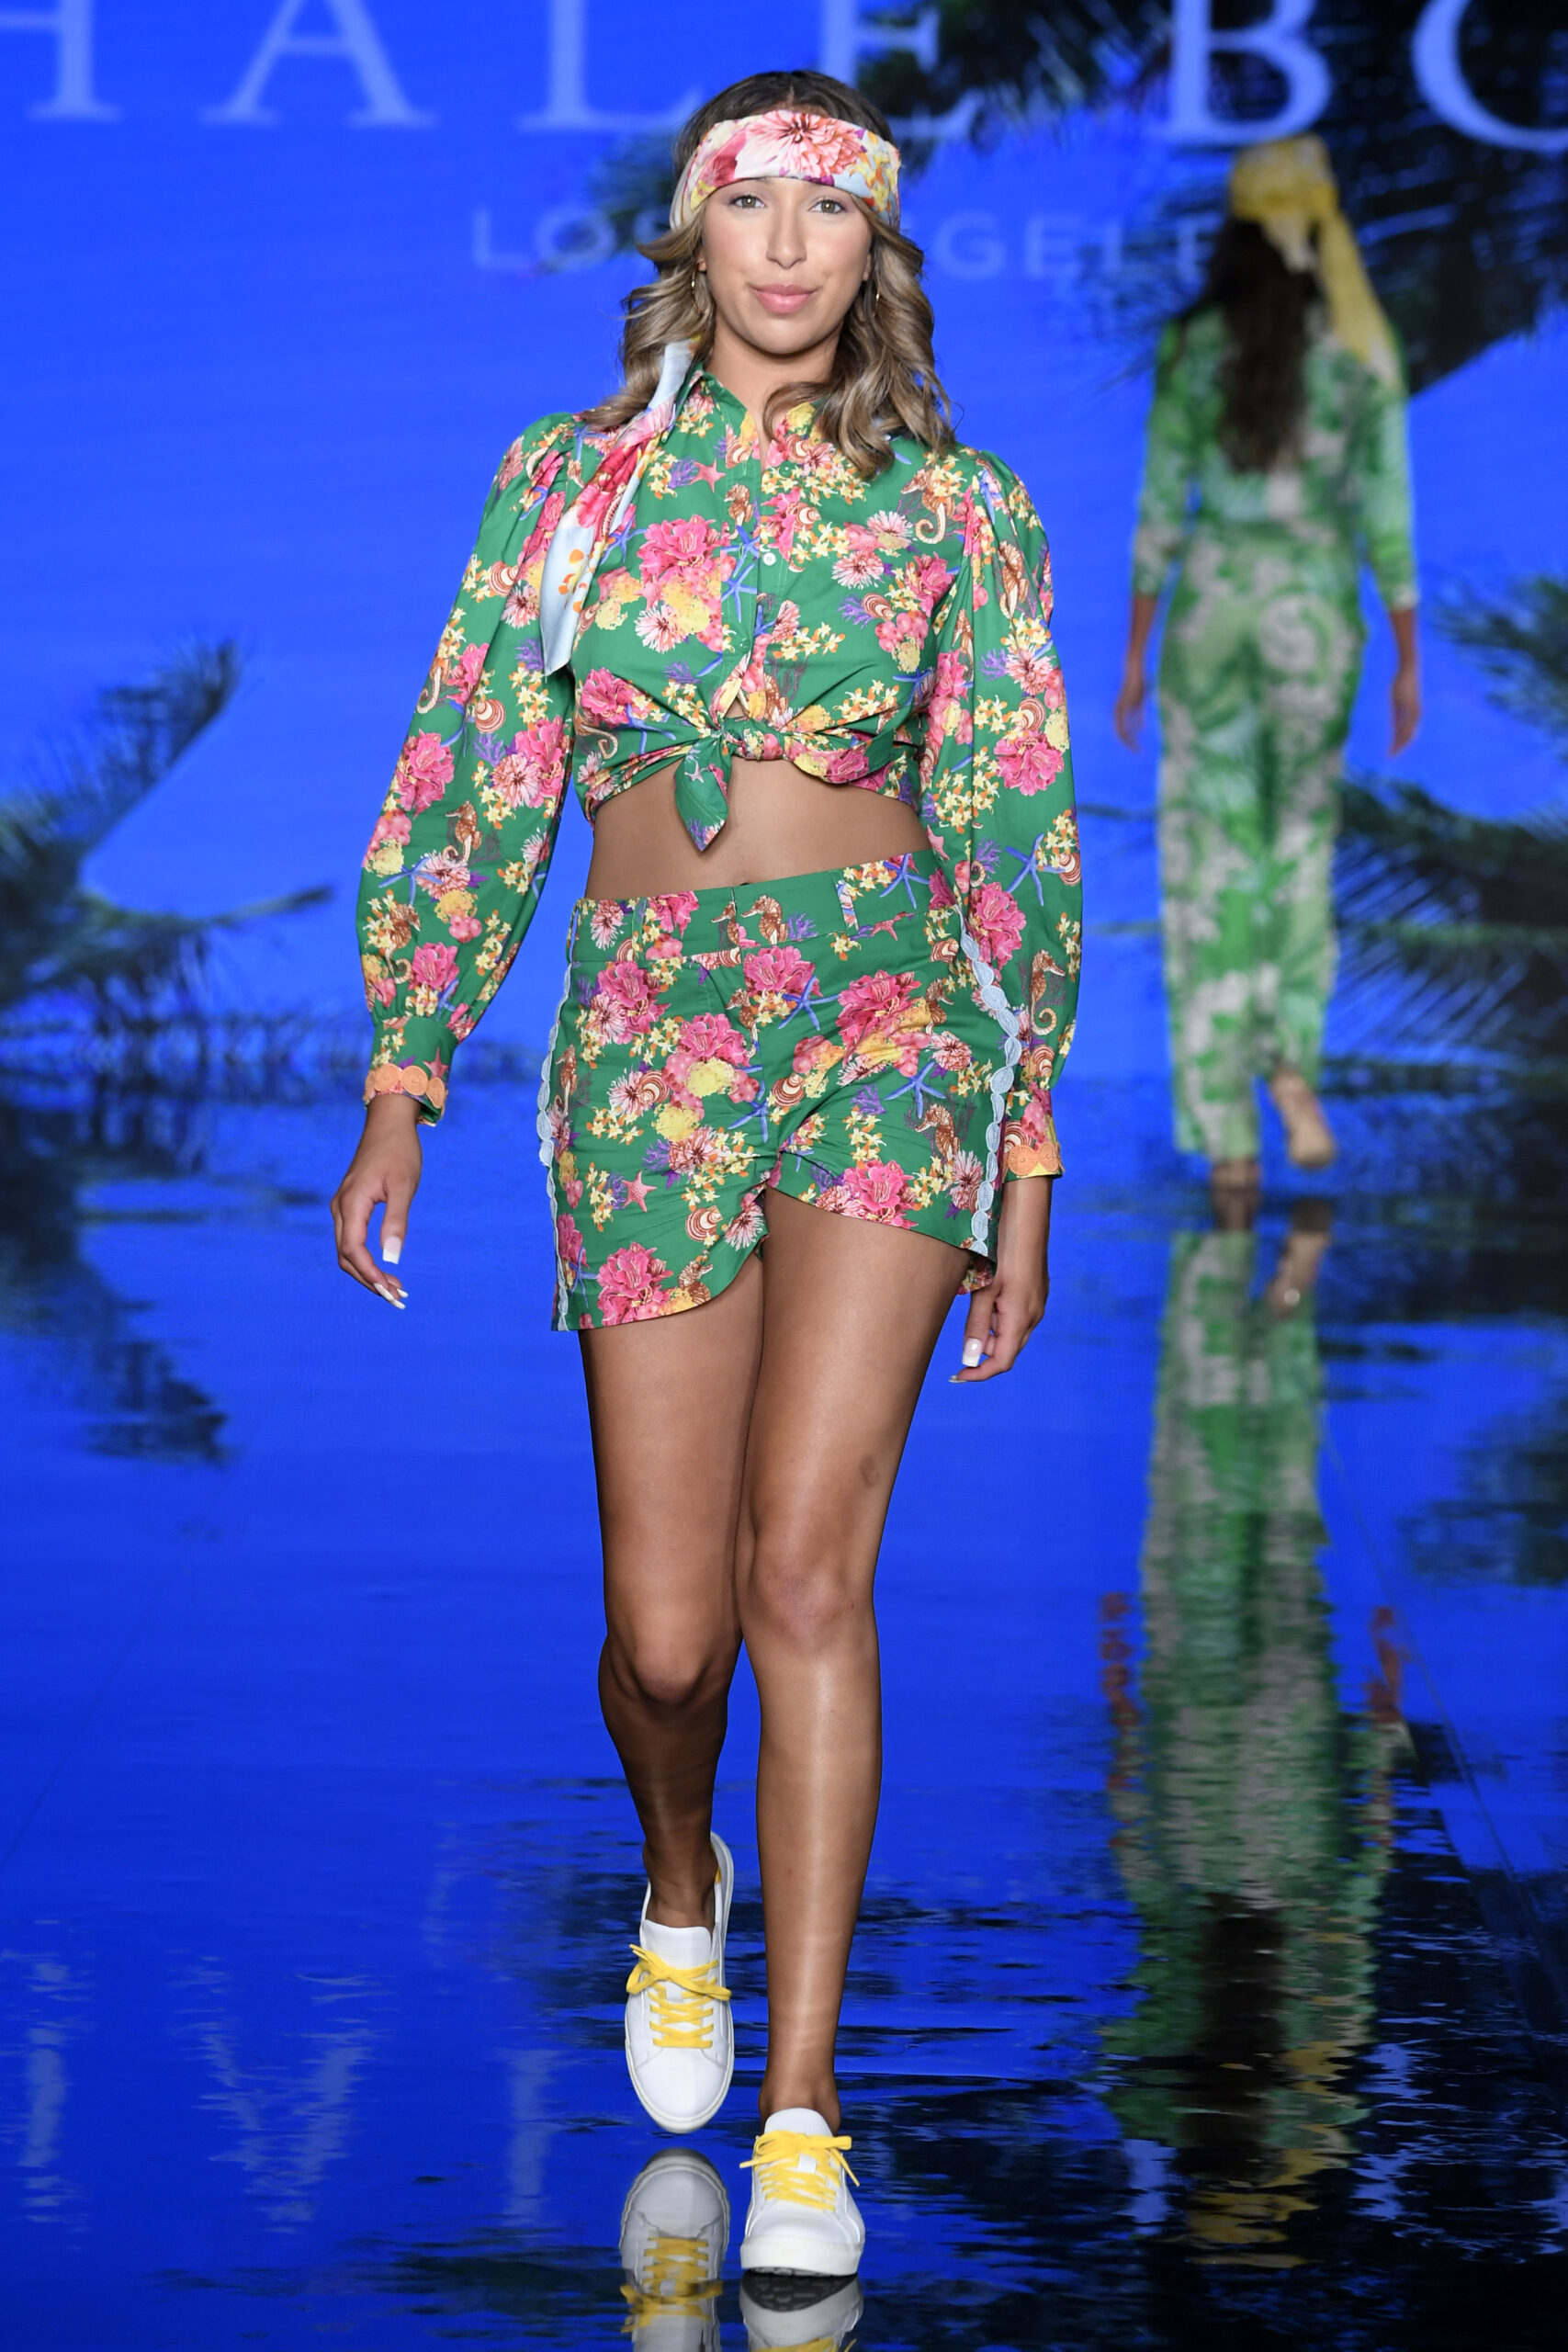 MIAMI BEACH, FLORIDA - JULY 11: A model walks the runway at the Hale Bob Show during Miami Swim Week Powered By Art Hearts Fashion at Faena Forum on July 11, 2021 in Miami Beach, Florida. (Photo by Arun Nevader/Getty Images for Art Hearts Fashion)